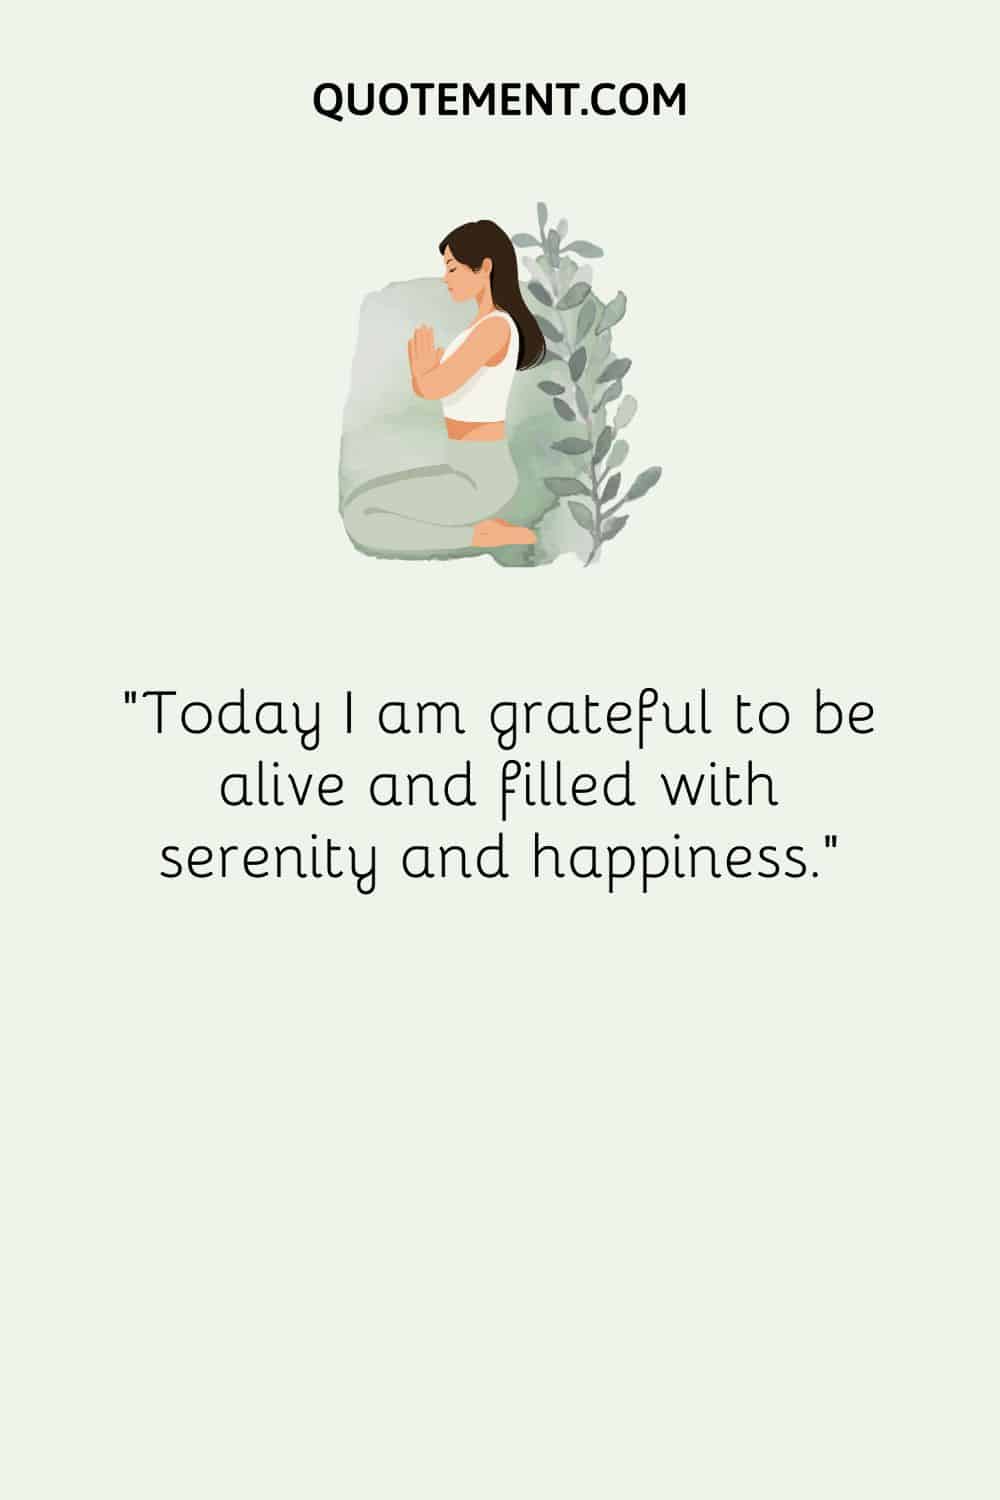 Today I am grateful to be alive and filled with serenity and happiness